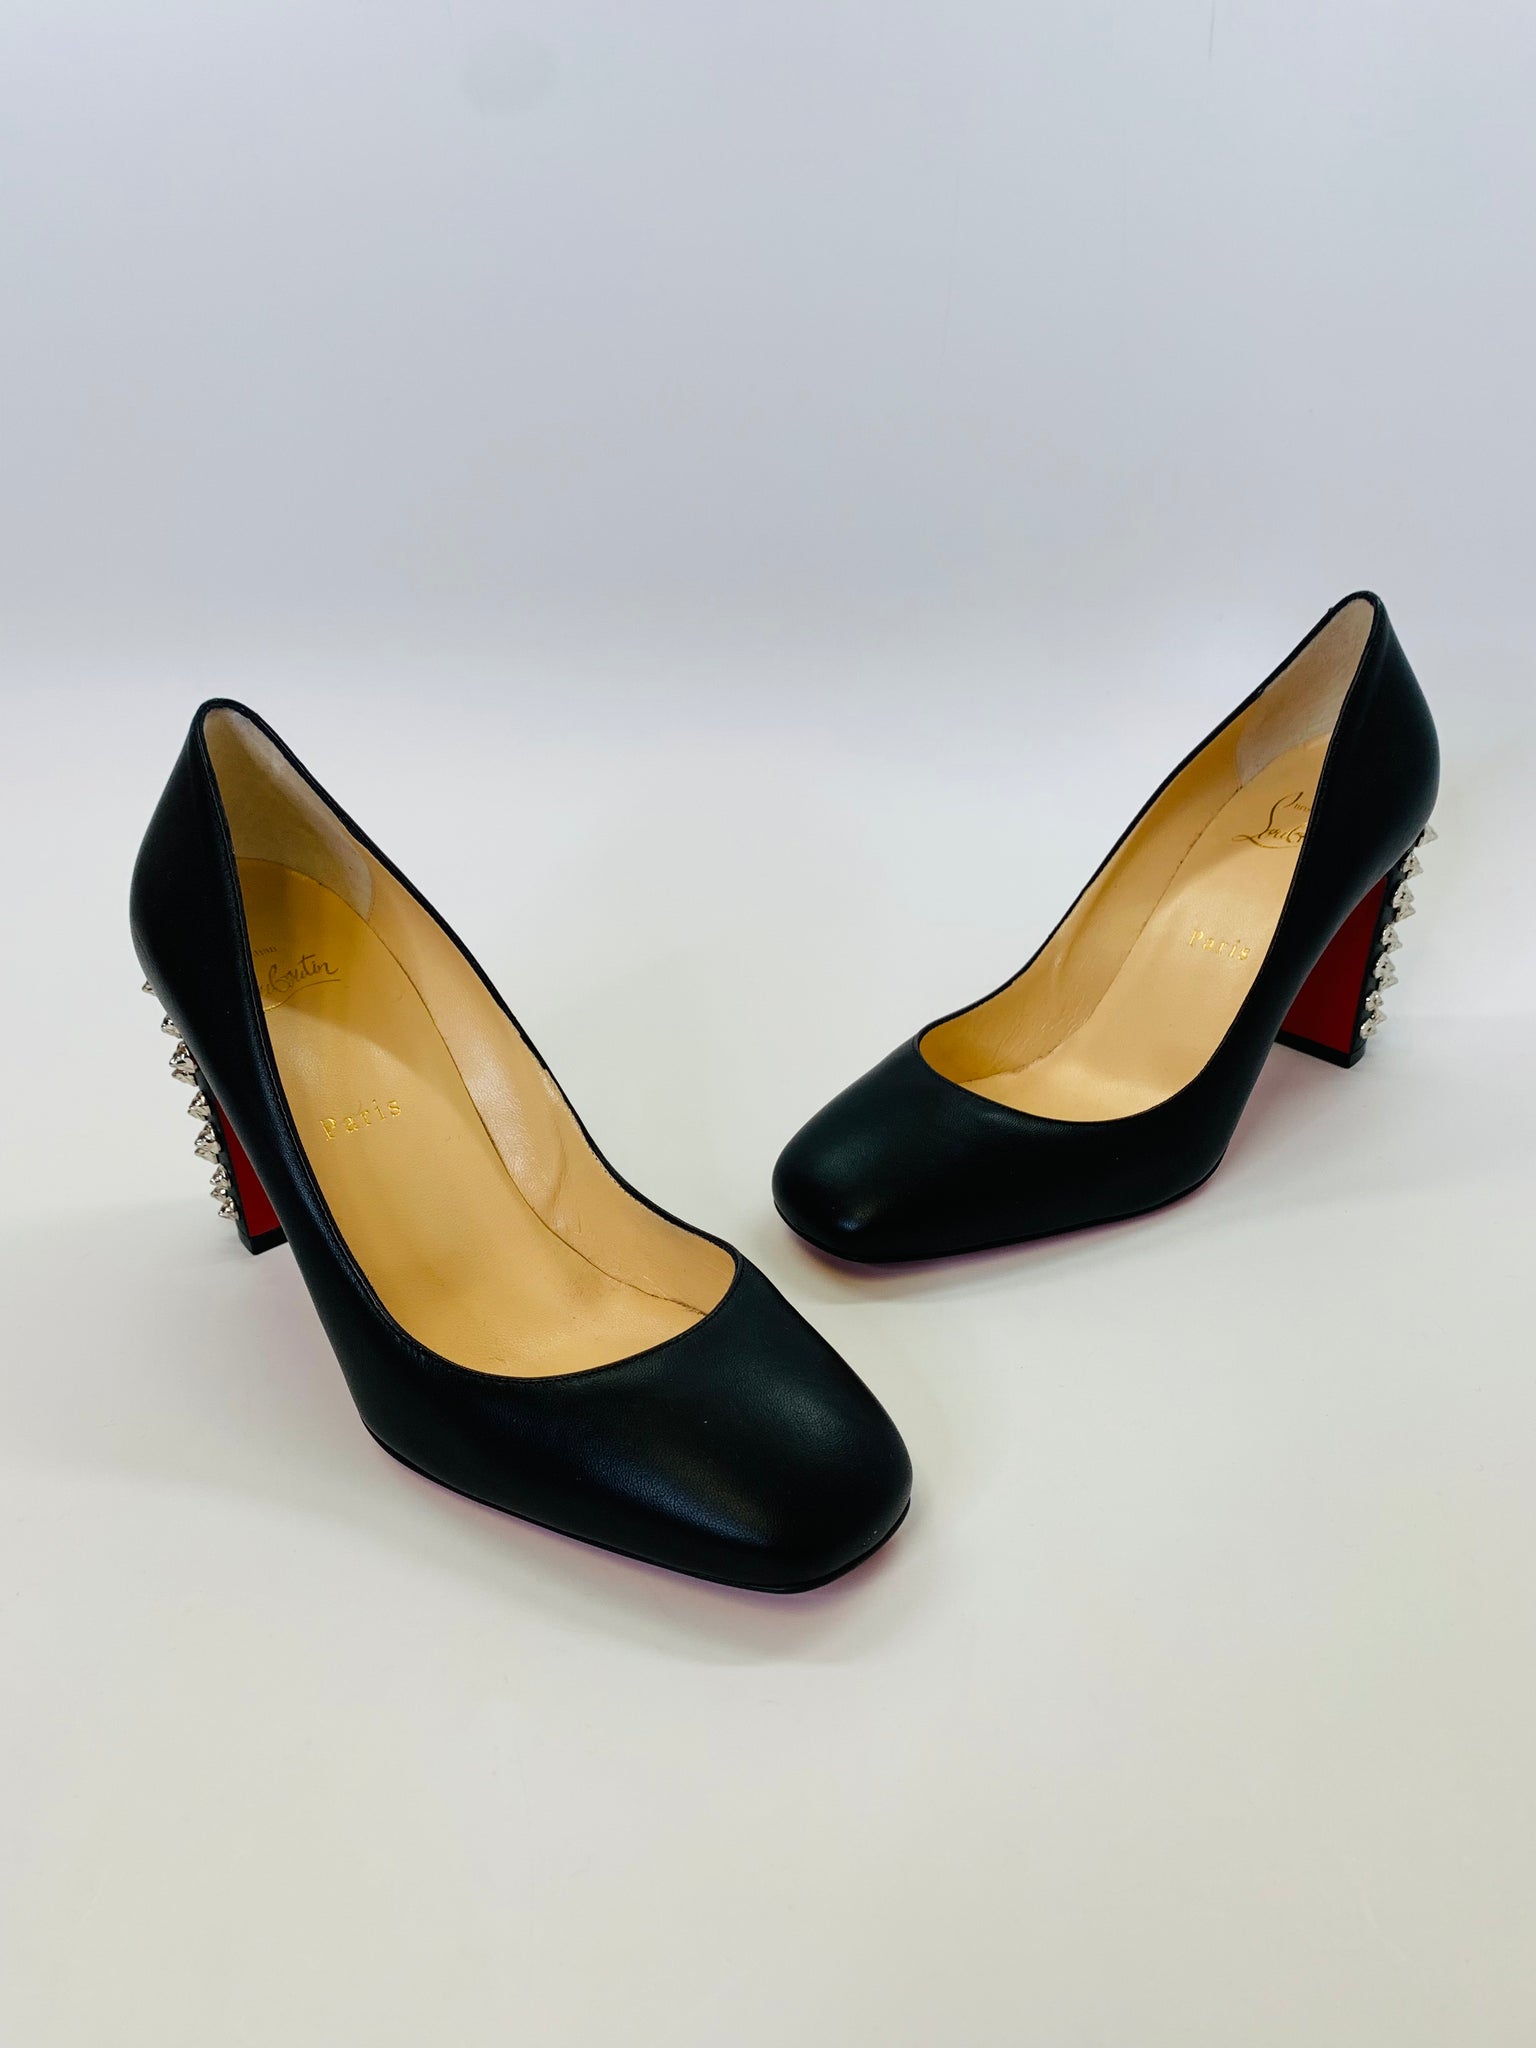 CHRISTIAN LOUBOUTIN Black Leather Pumps Heels Silver Spikes / Studded SIZE  35